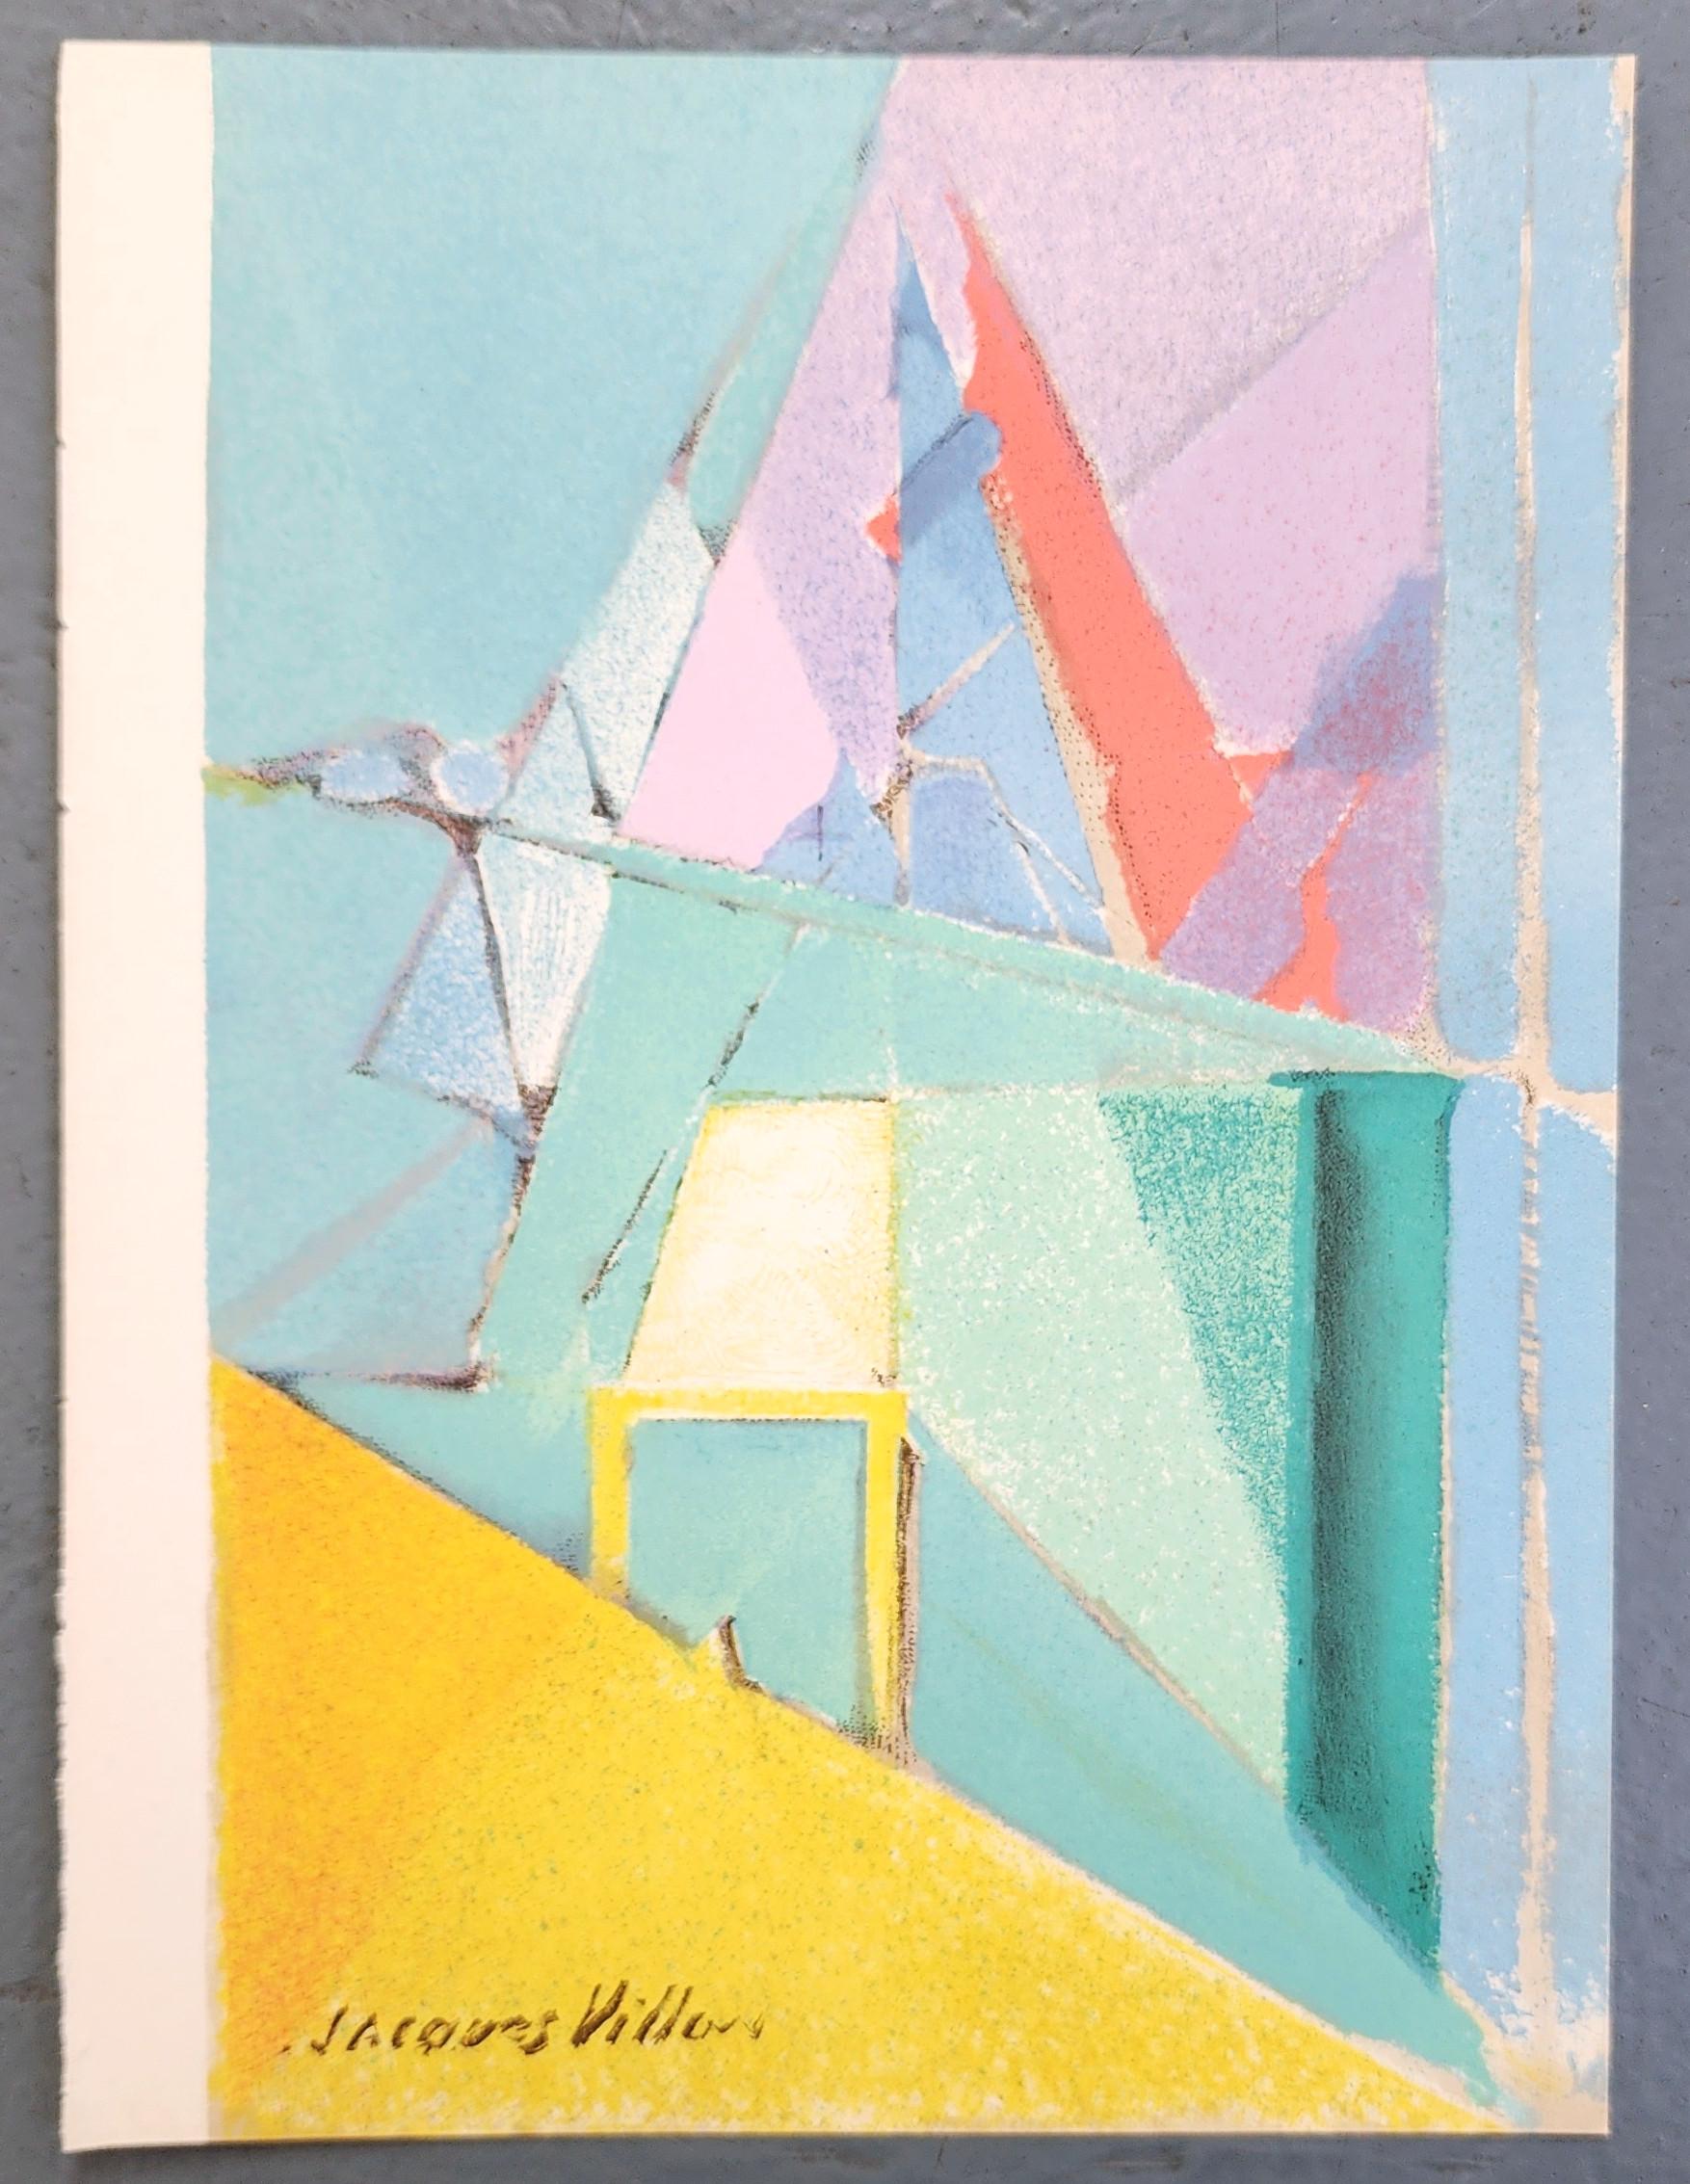 Jacques Villon Abstract Print - Intimite (70% OFF LIST PRICE FOR A VERY LIMITED TIME, FRAMING OPTIONS AVAILABLE)